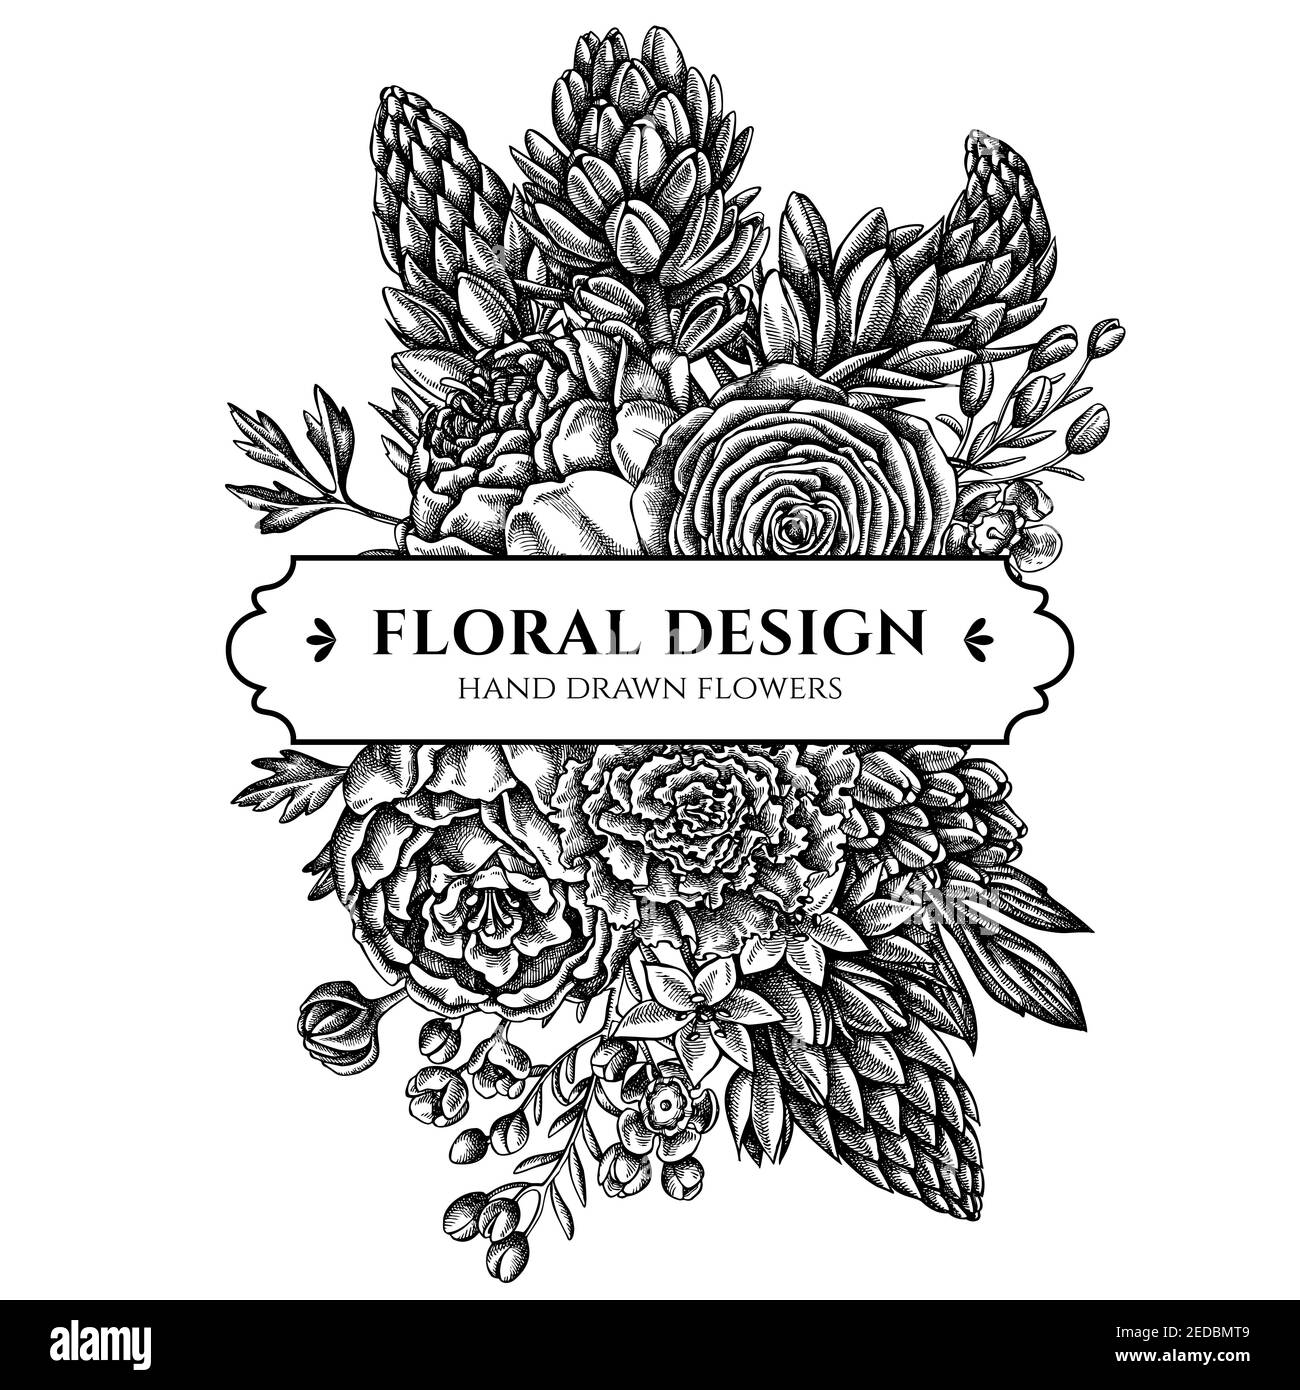 Floral bouquet design with black and white peony, carnation, ranunculus, wax flower, ornithogalum, hyacinth Stock Vector